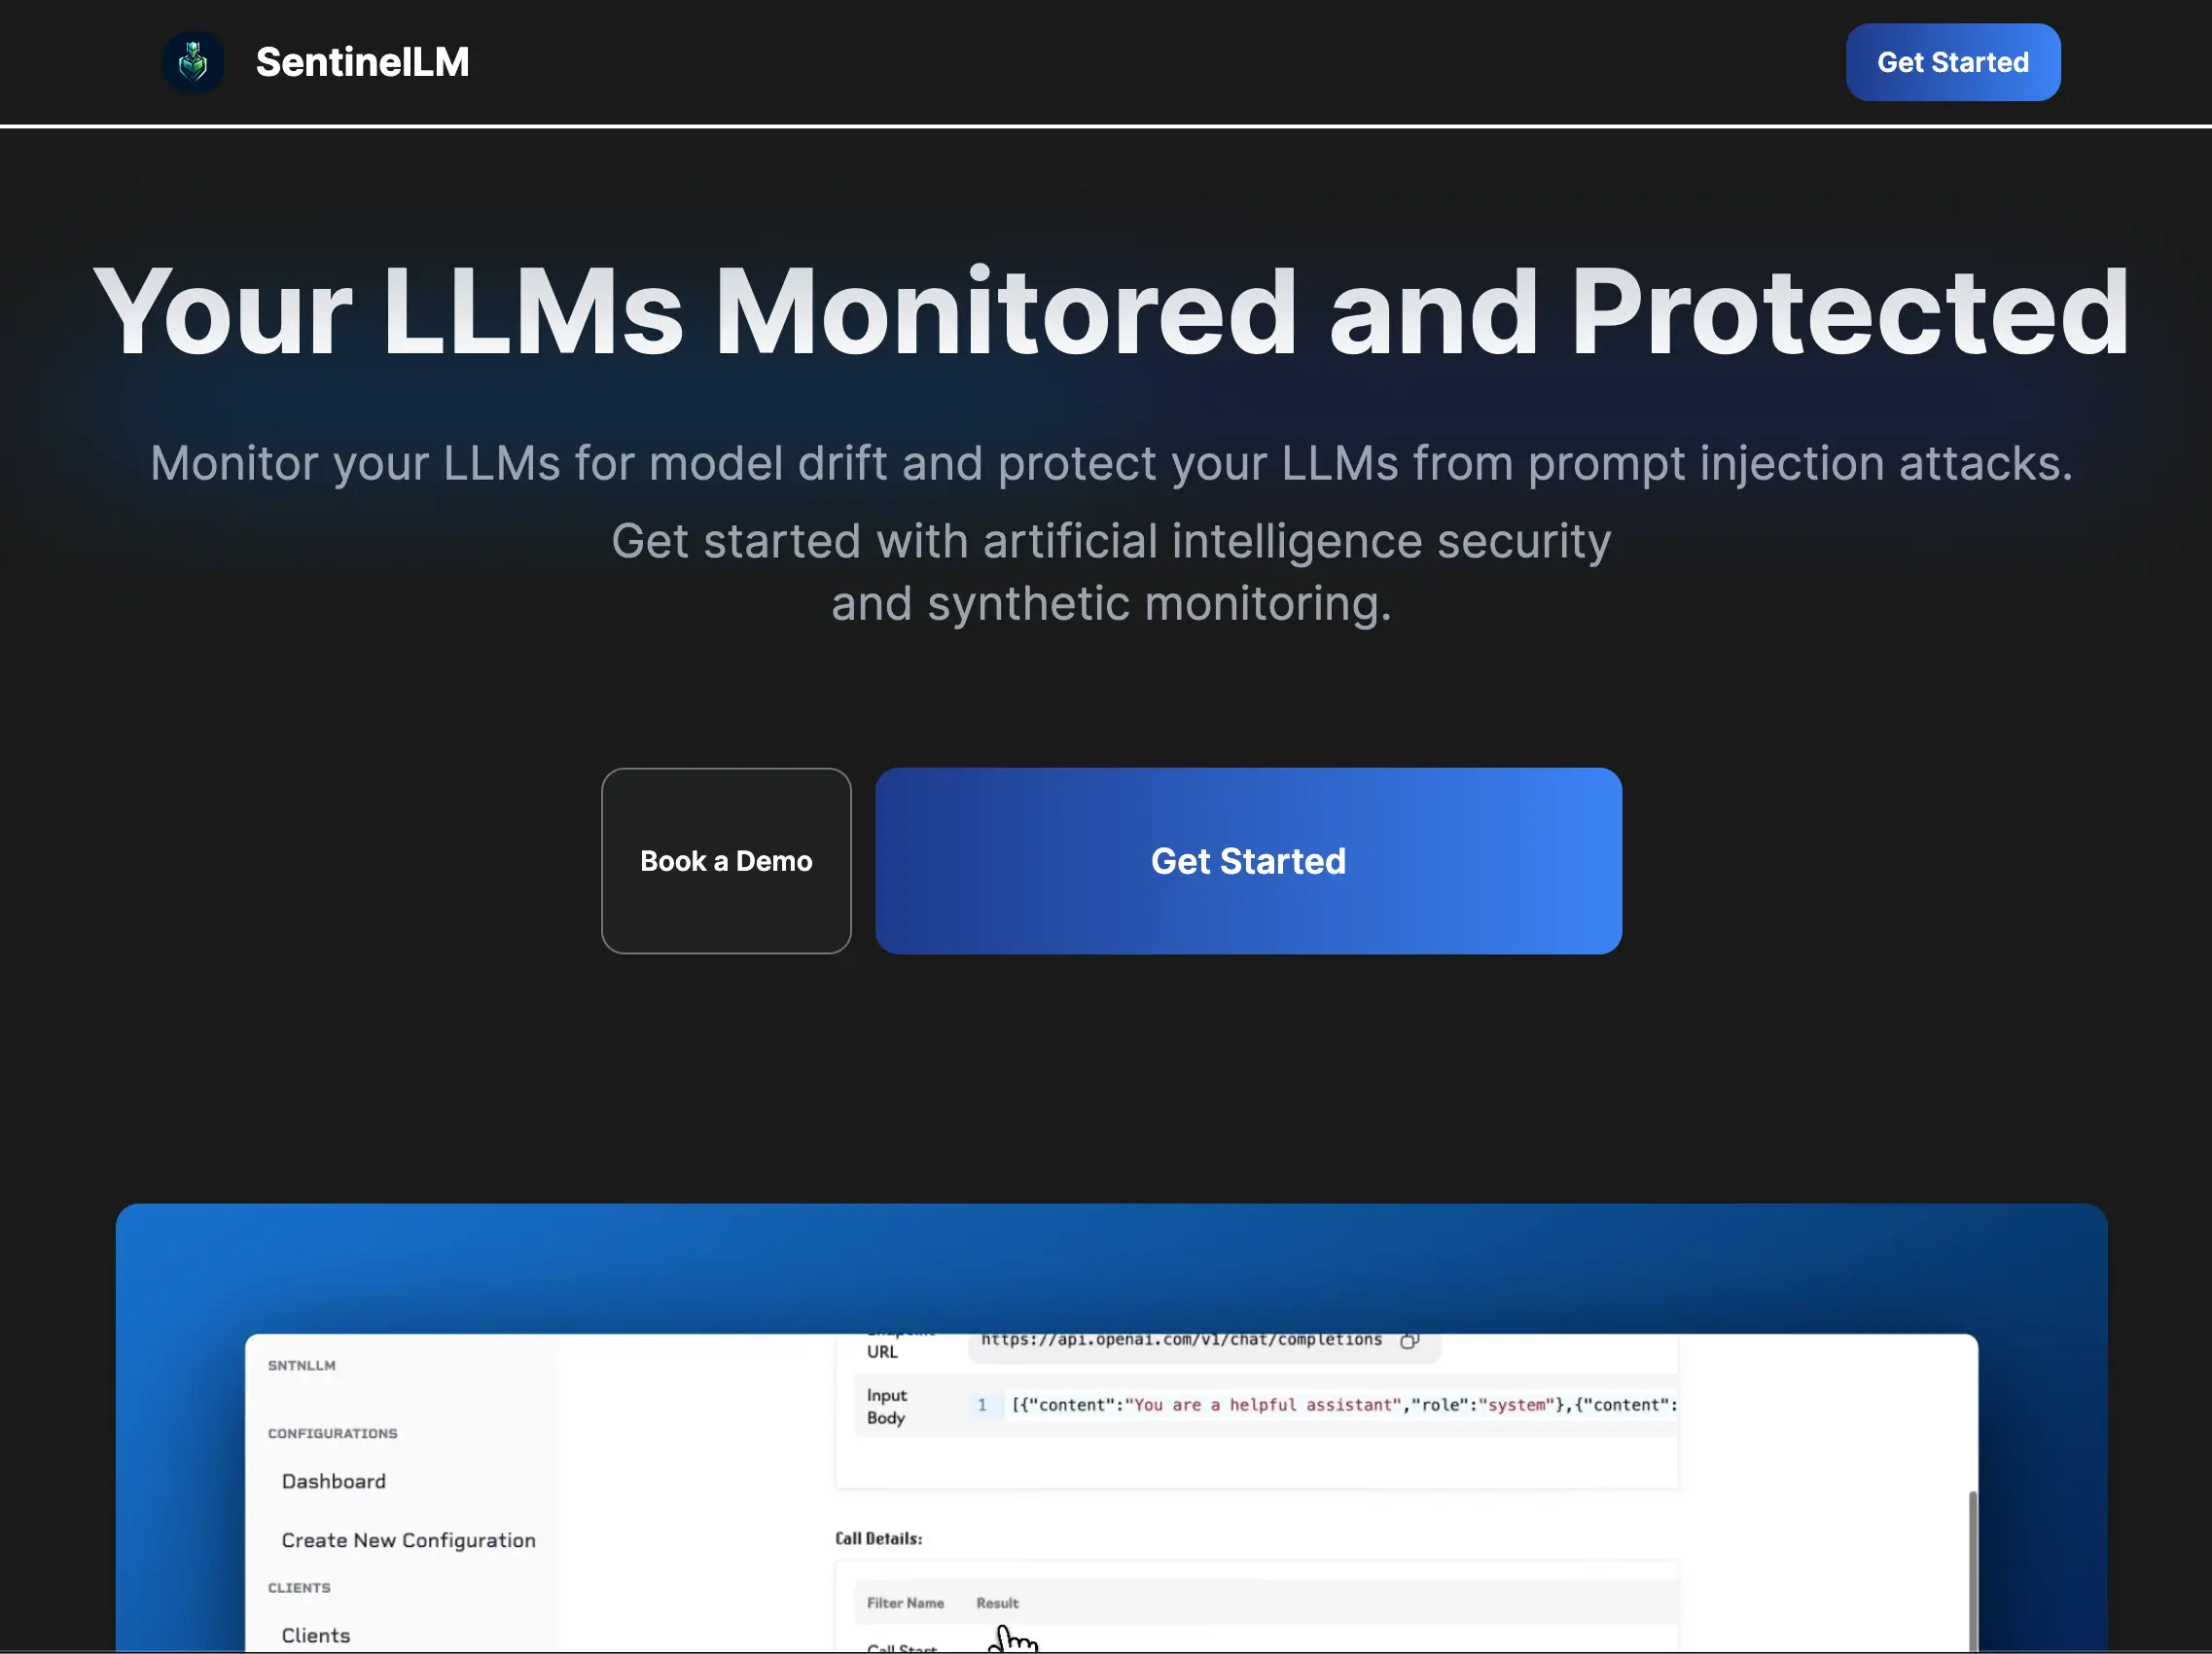 Your LLMs Monitored and Protected